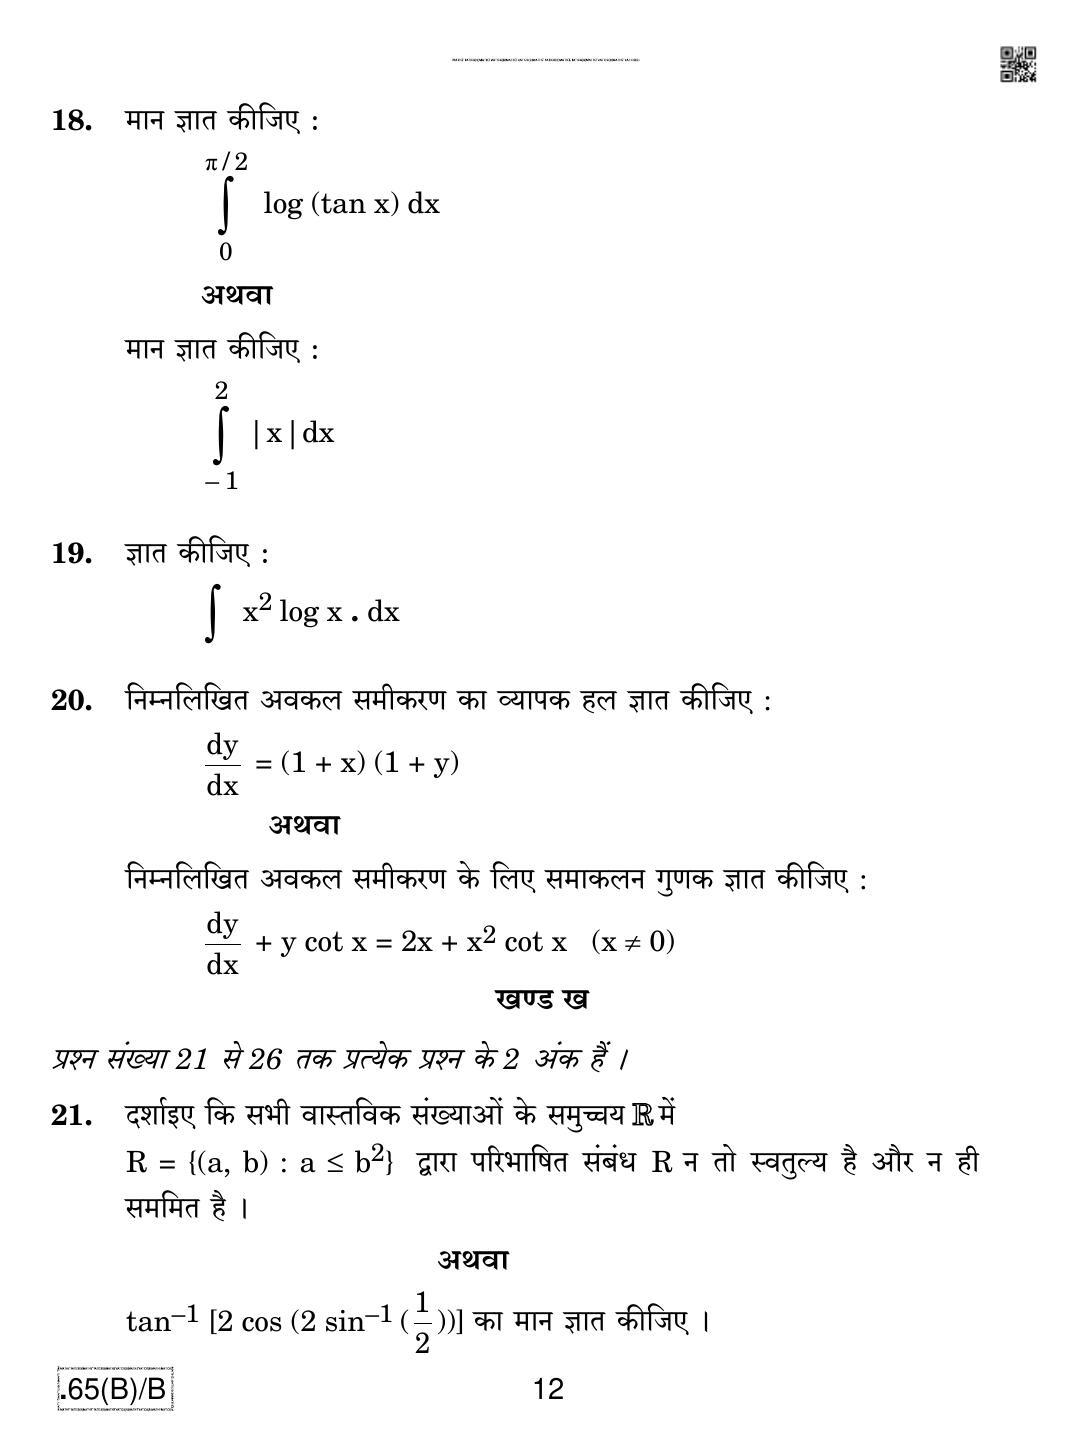 CBSE Class 12 65(B)-C - Maths For Blind Candidates 2020 Compartment Question Paper - Page 12